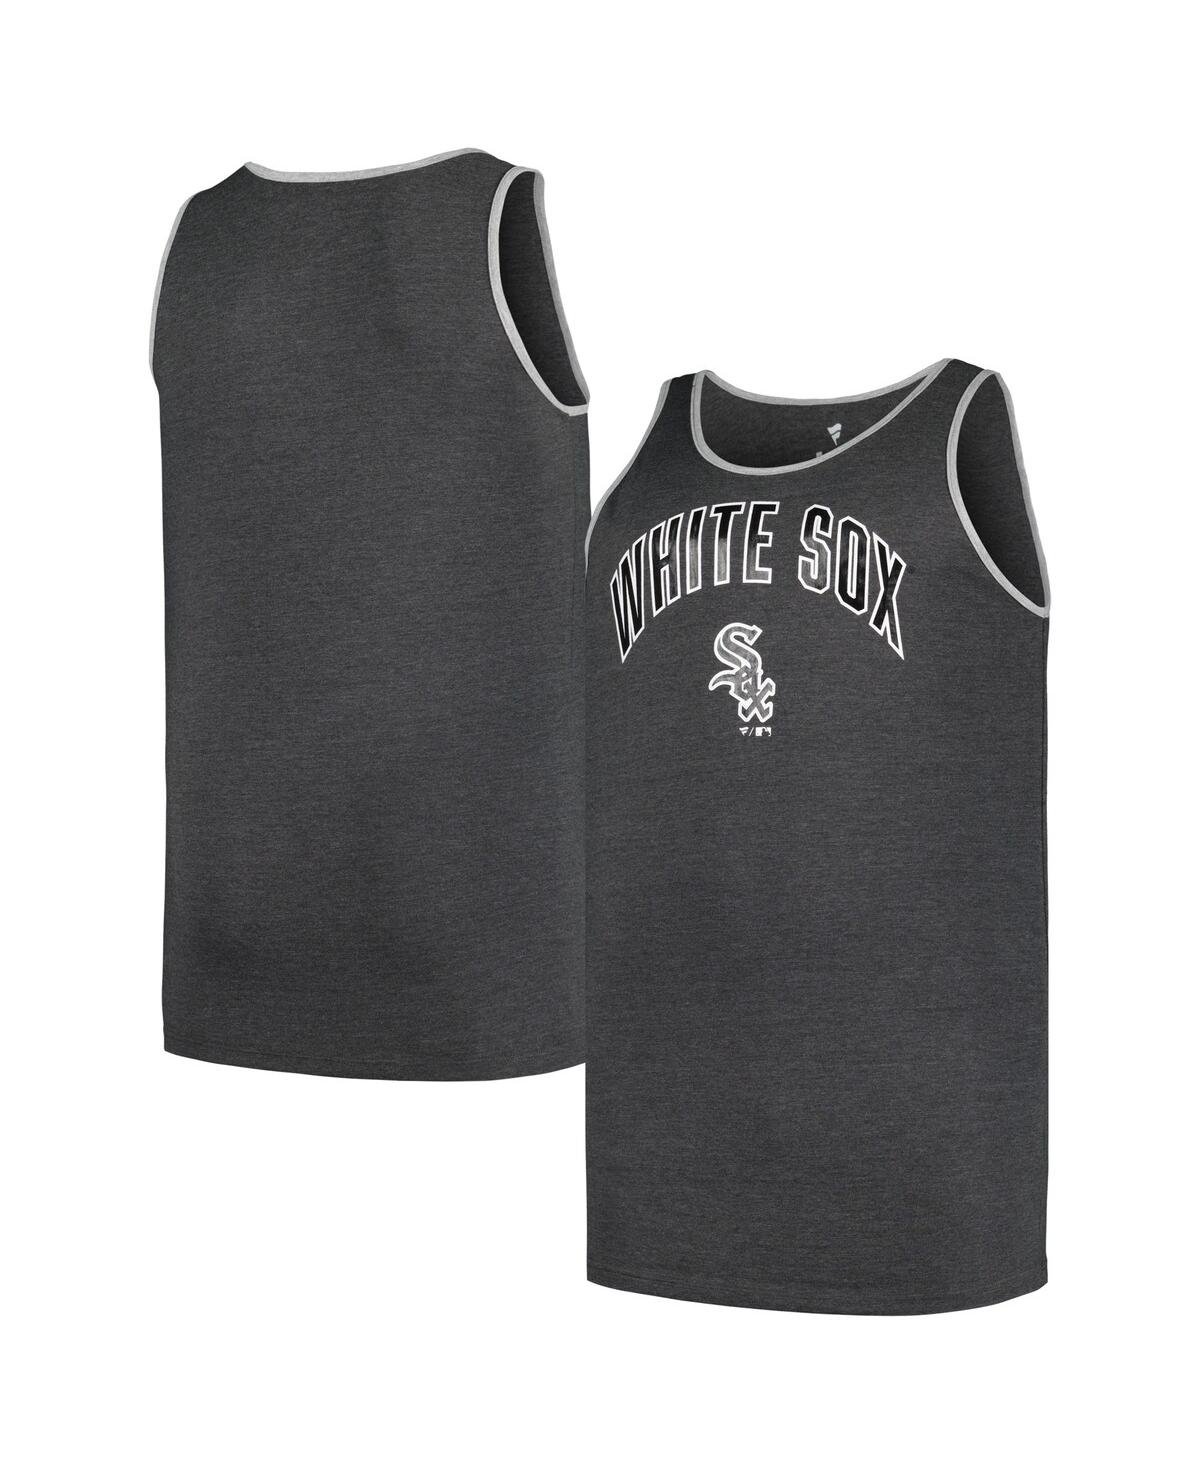 PROFILE MEN'S PROFILE HEATHER CHARCOAL CHICAGO WHITE SOX BIG AND TALL ARCH OVER LOGO TANK TOP